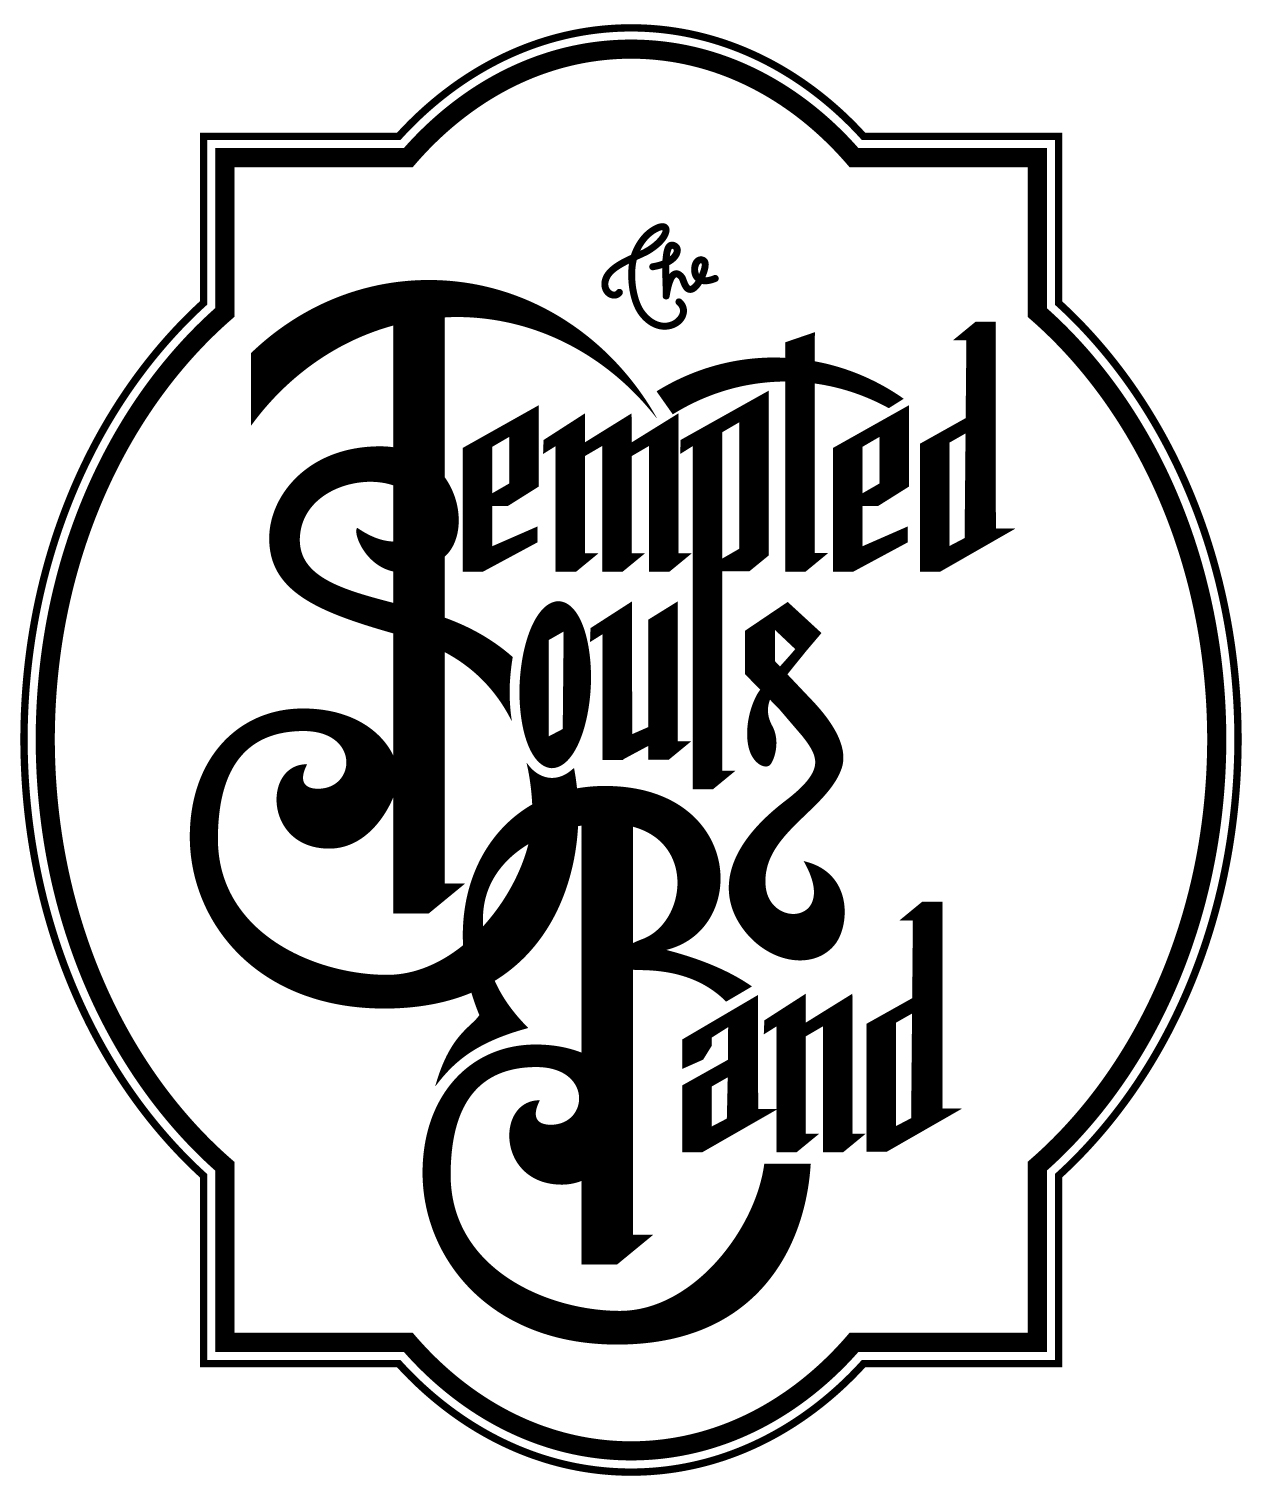 Tempted Souls Band